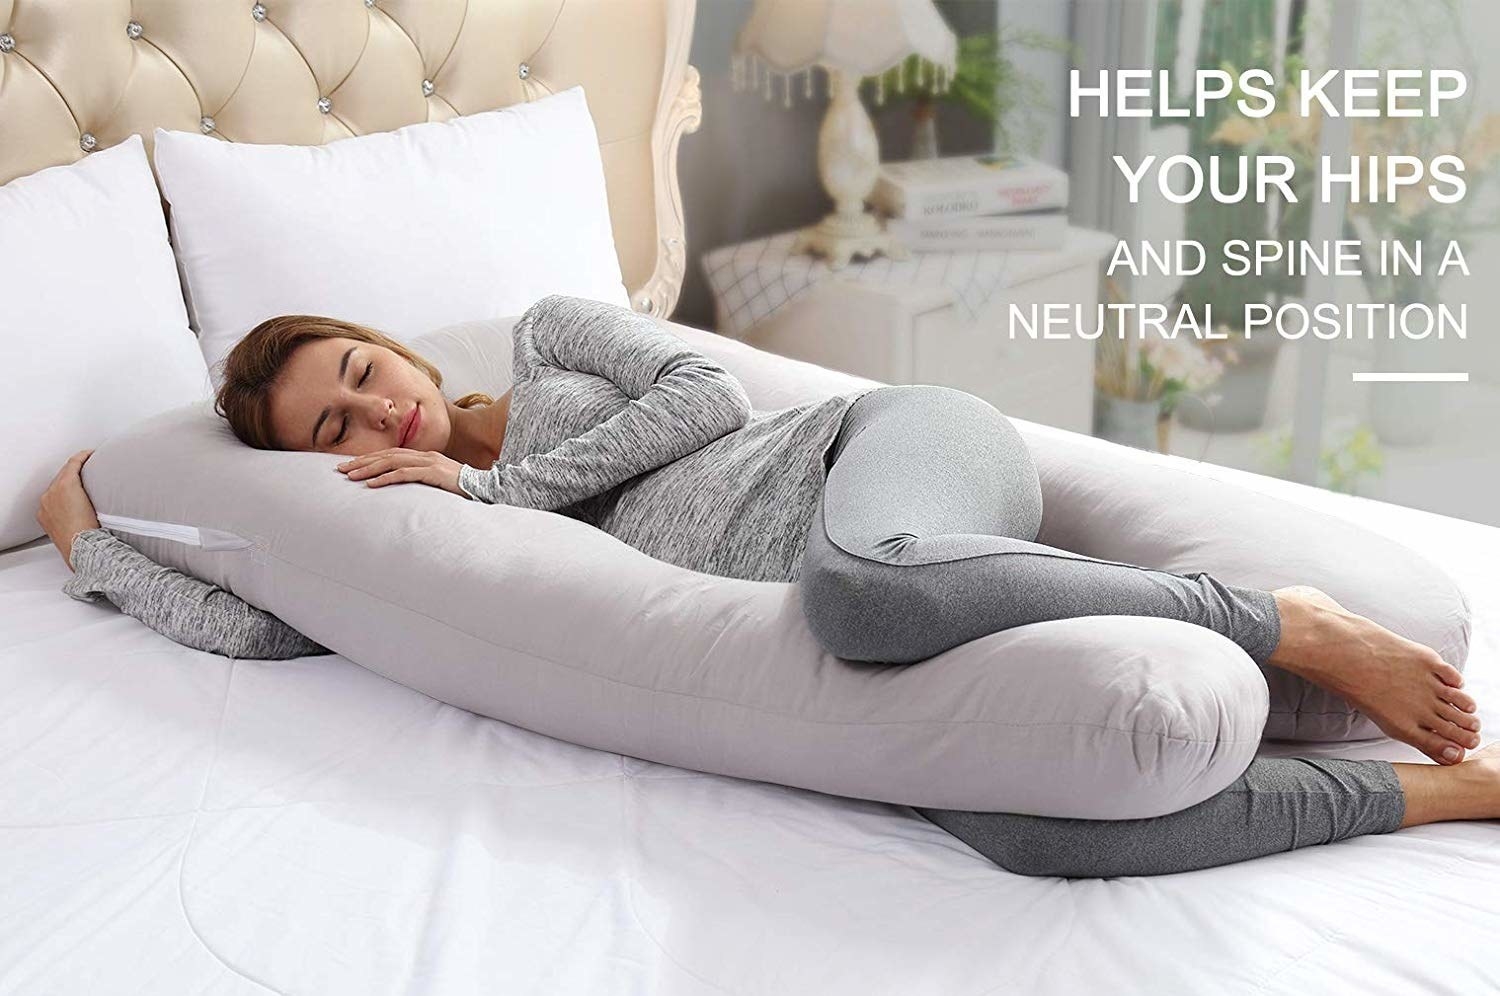 A model cuddling the pillow with text that reads &quot;Helps keep your hips and spine in a neutral position&quot;